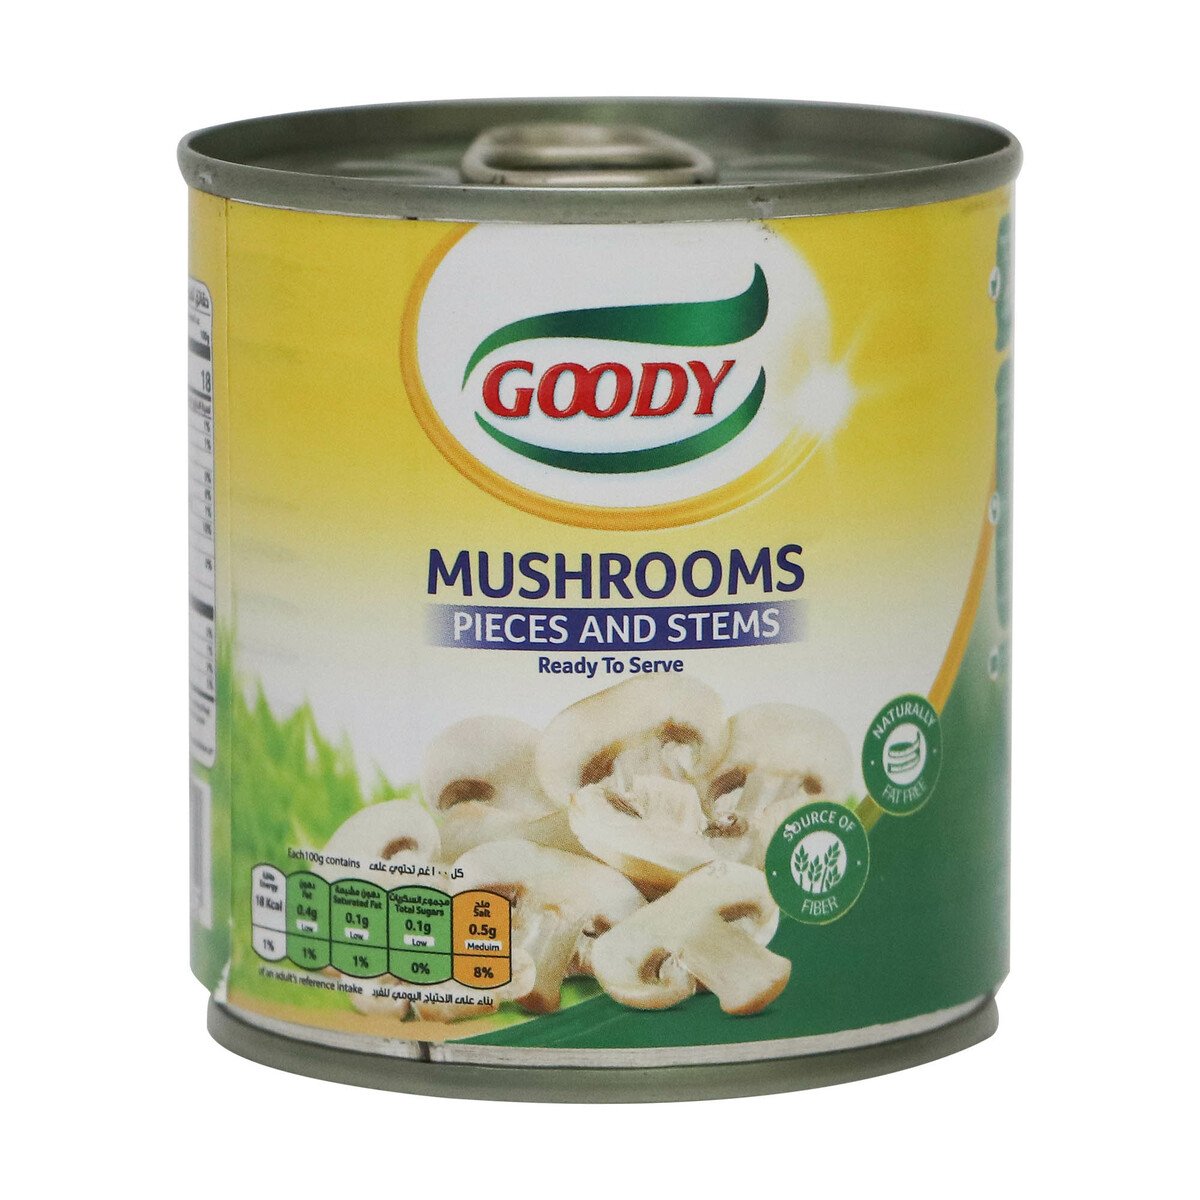 Goody Mushrooms Pieces and Stems 200g